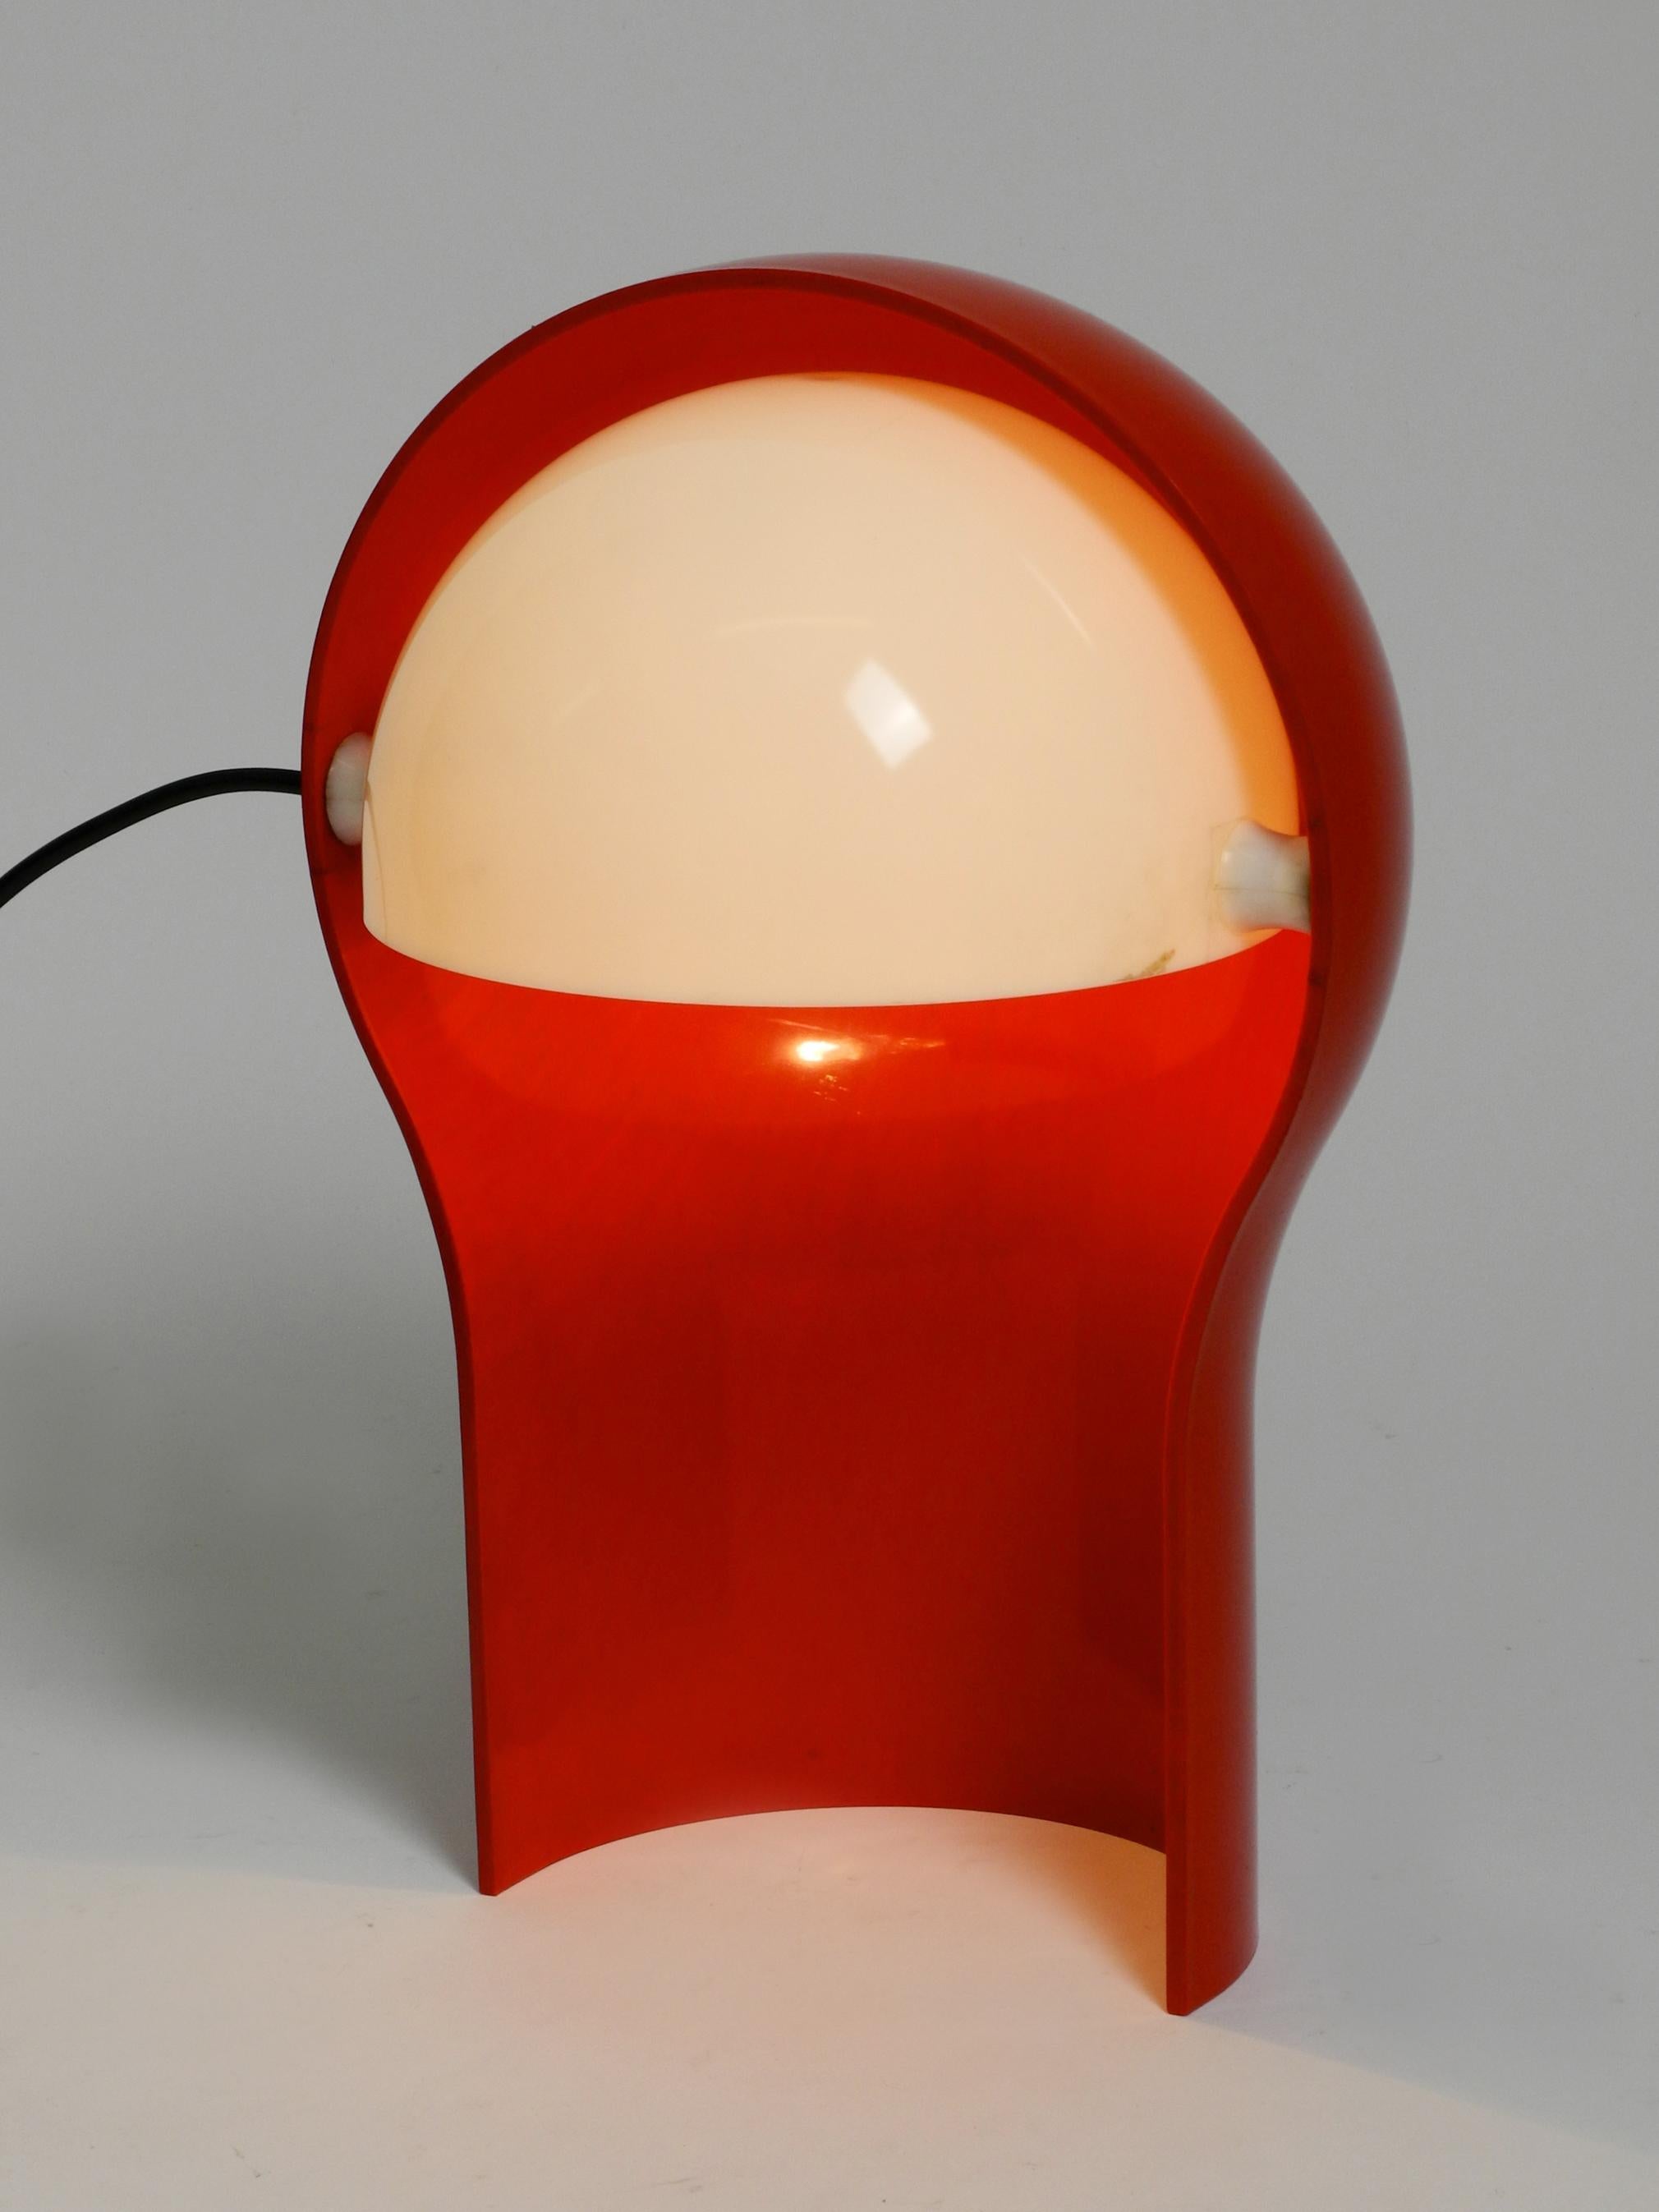 Telegono Table Lamp by Vico Magistretti for Artemide 1968 in Very Good Condition For Sale 7